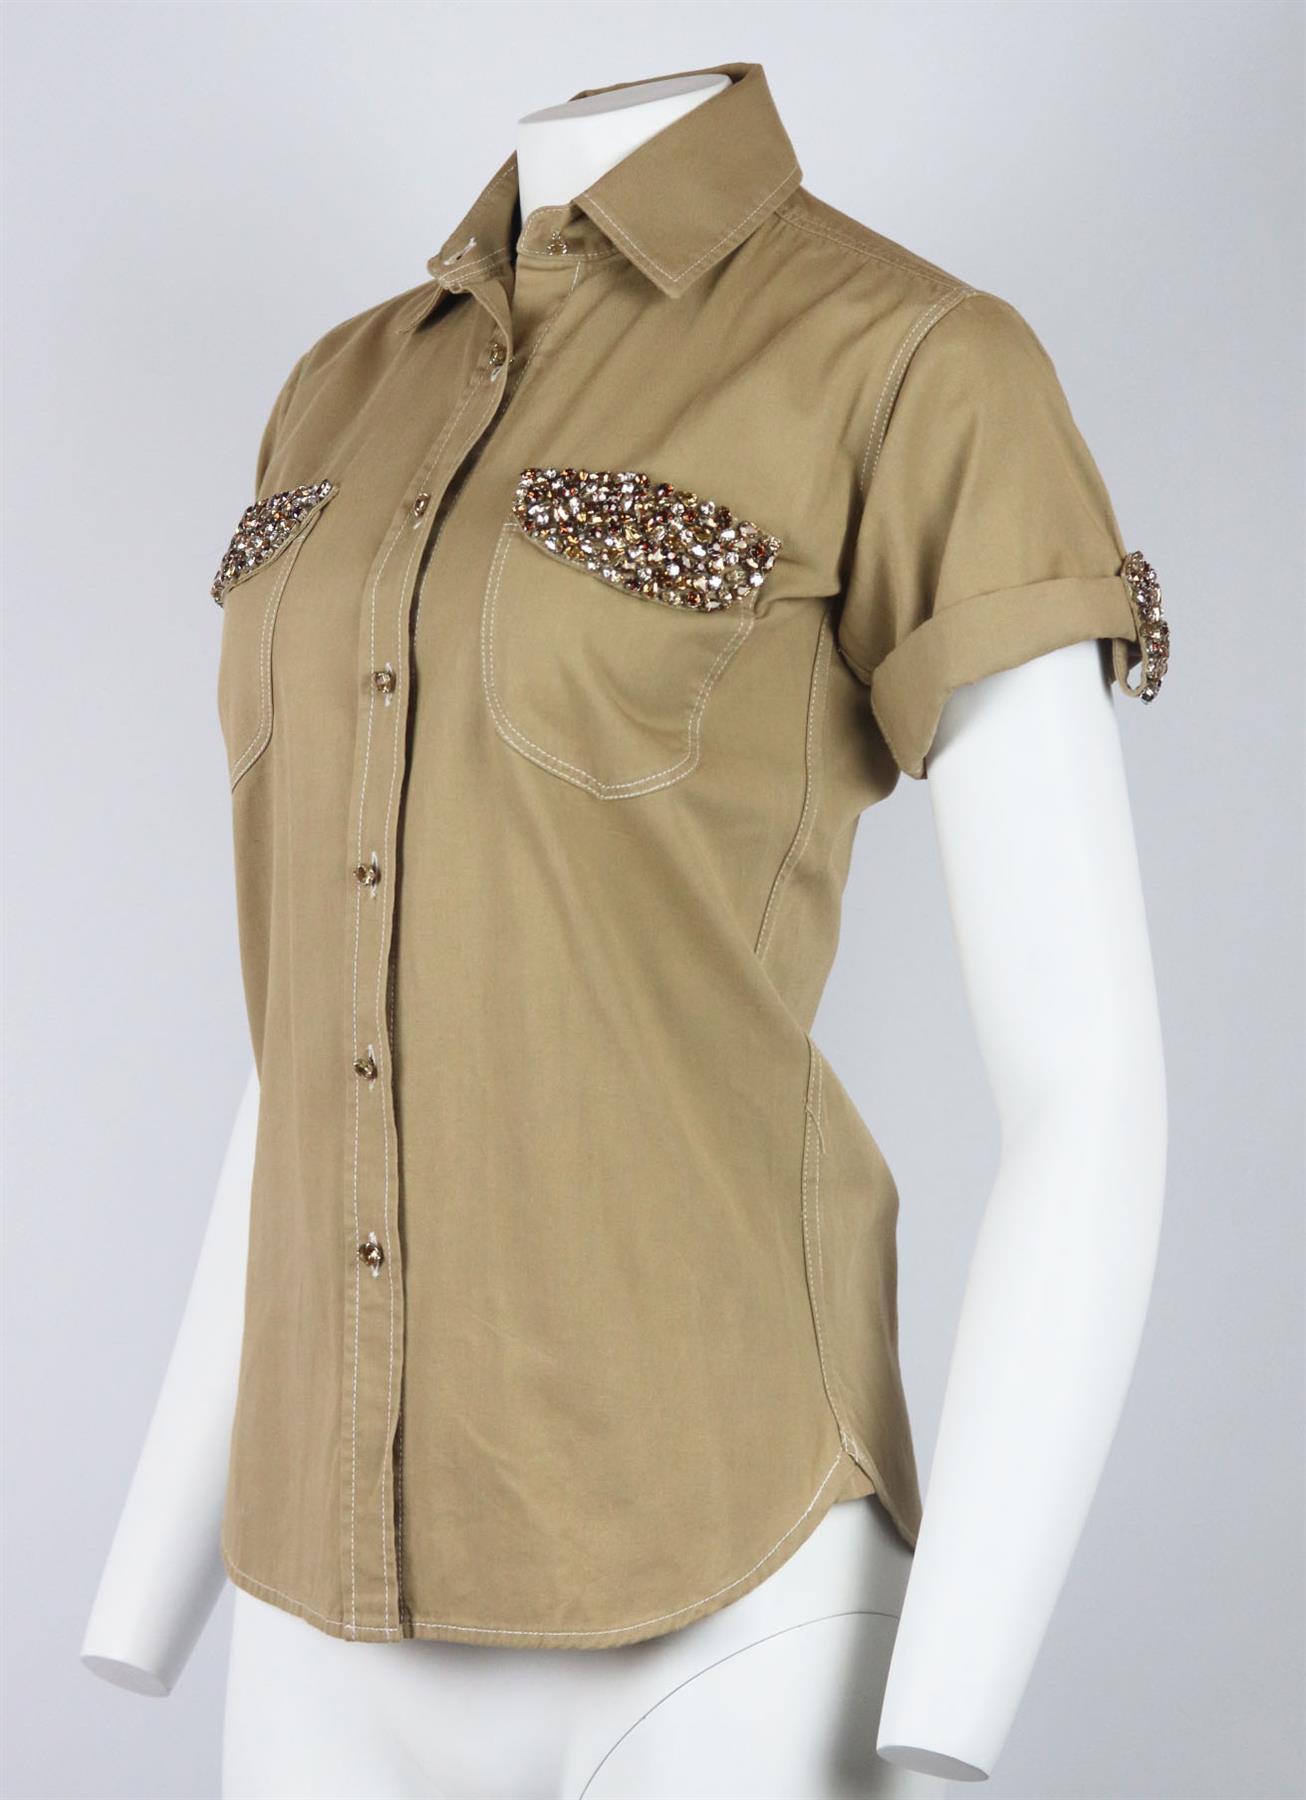 This shirt by Ermanno Scervino has been made from cotton-gabardine that has a smooth, structured feel, it's trimmed throughout with contrast stitching and bold crystal-embellished to glamorise a casual shirt. Beige cotton-gabardine. Button fastening